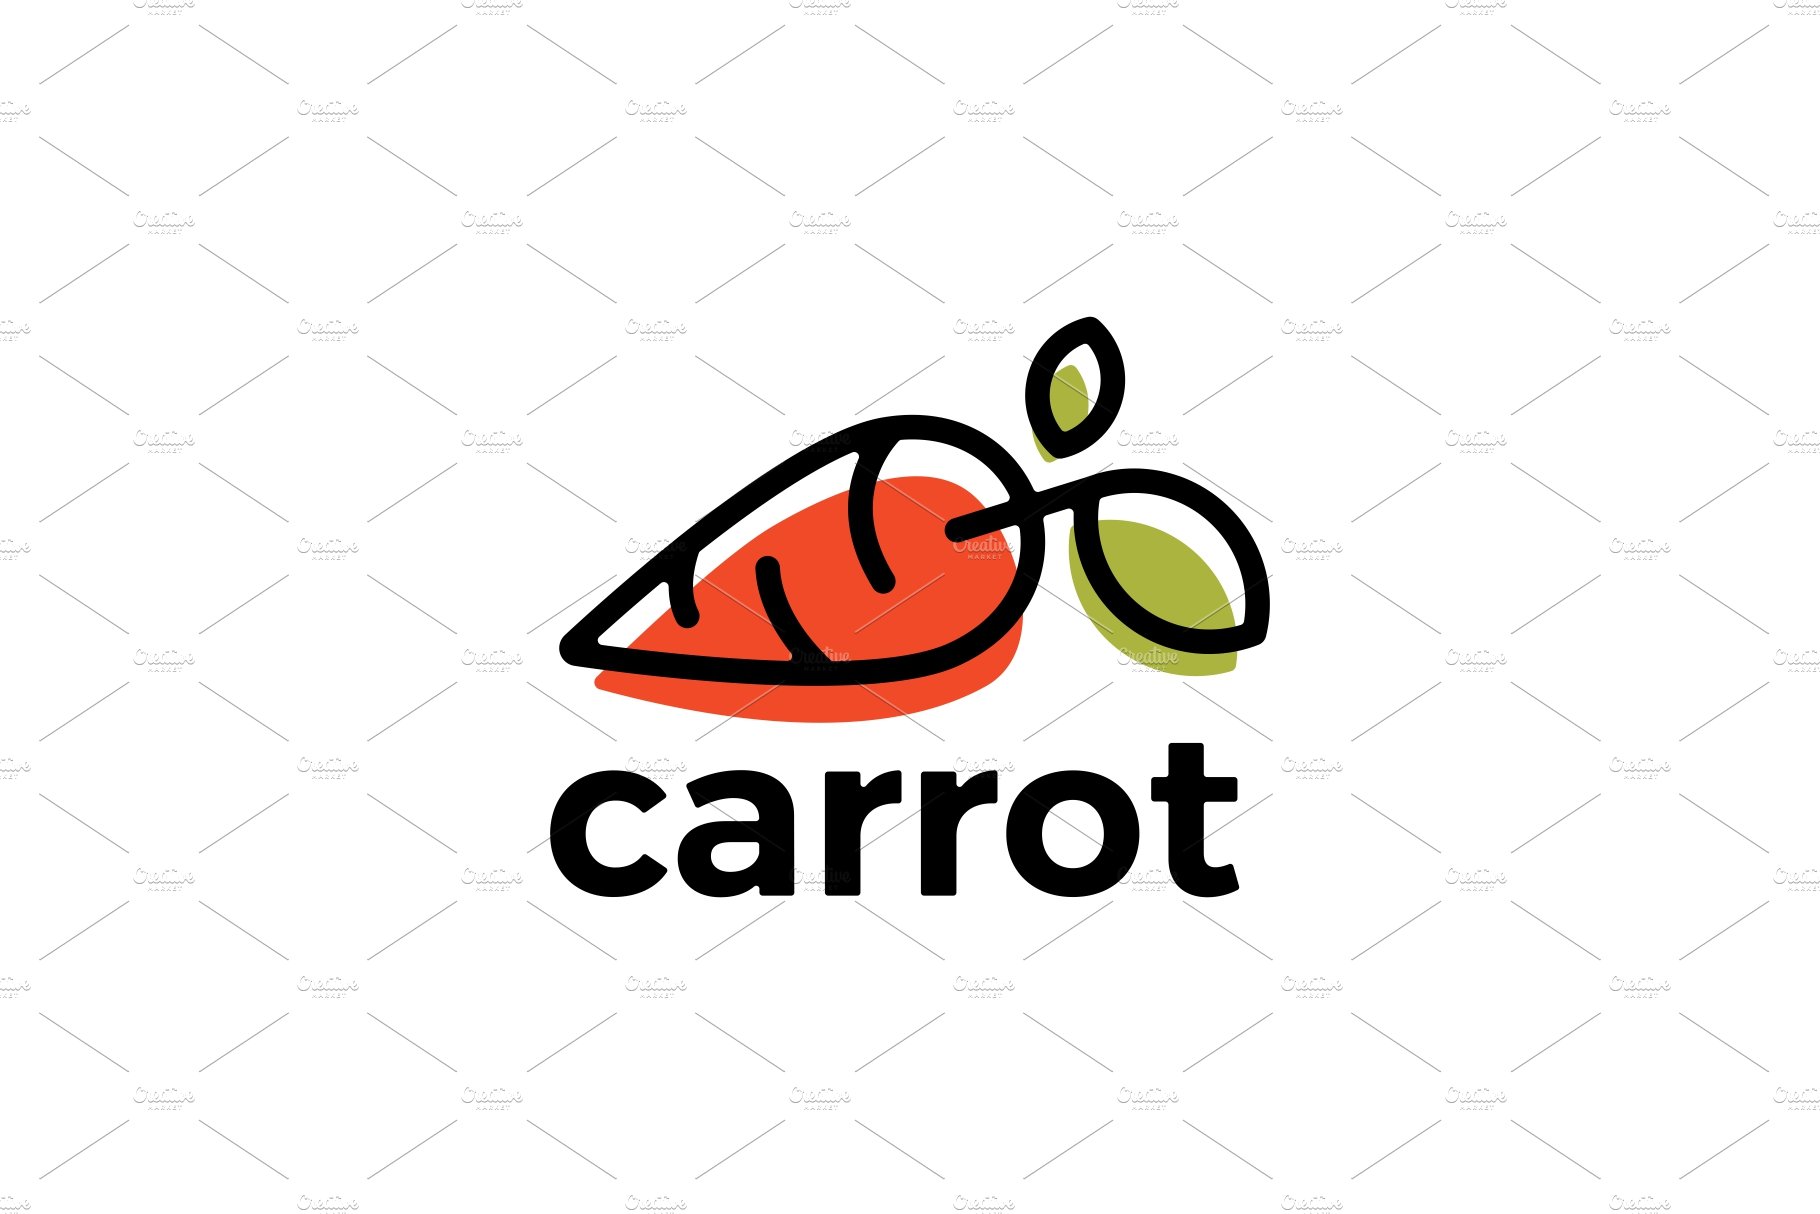 carrot logo vector icon illustration cover image.